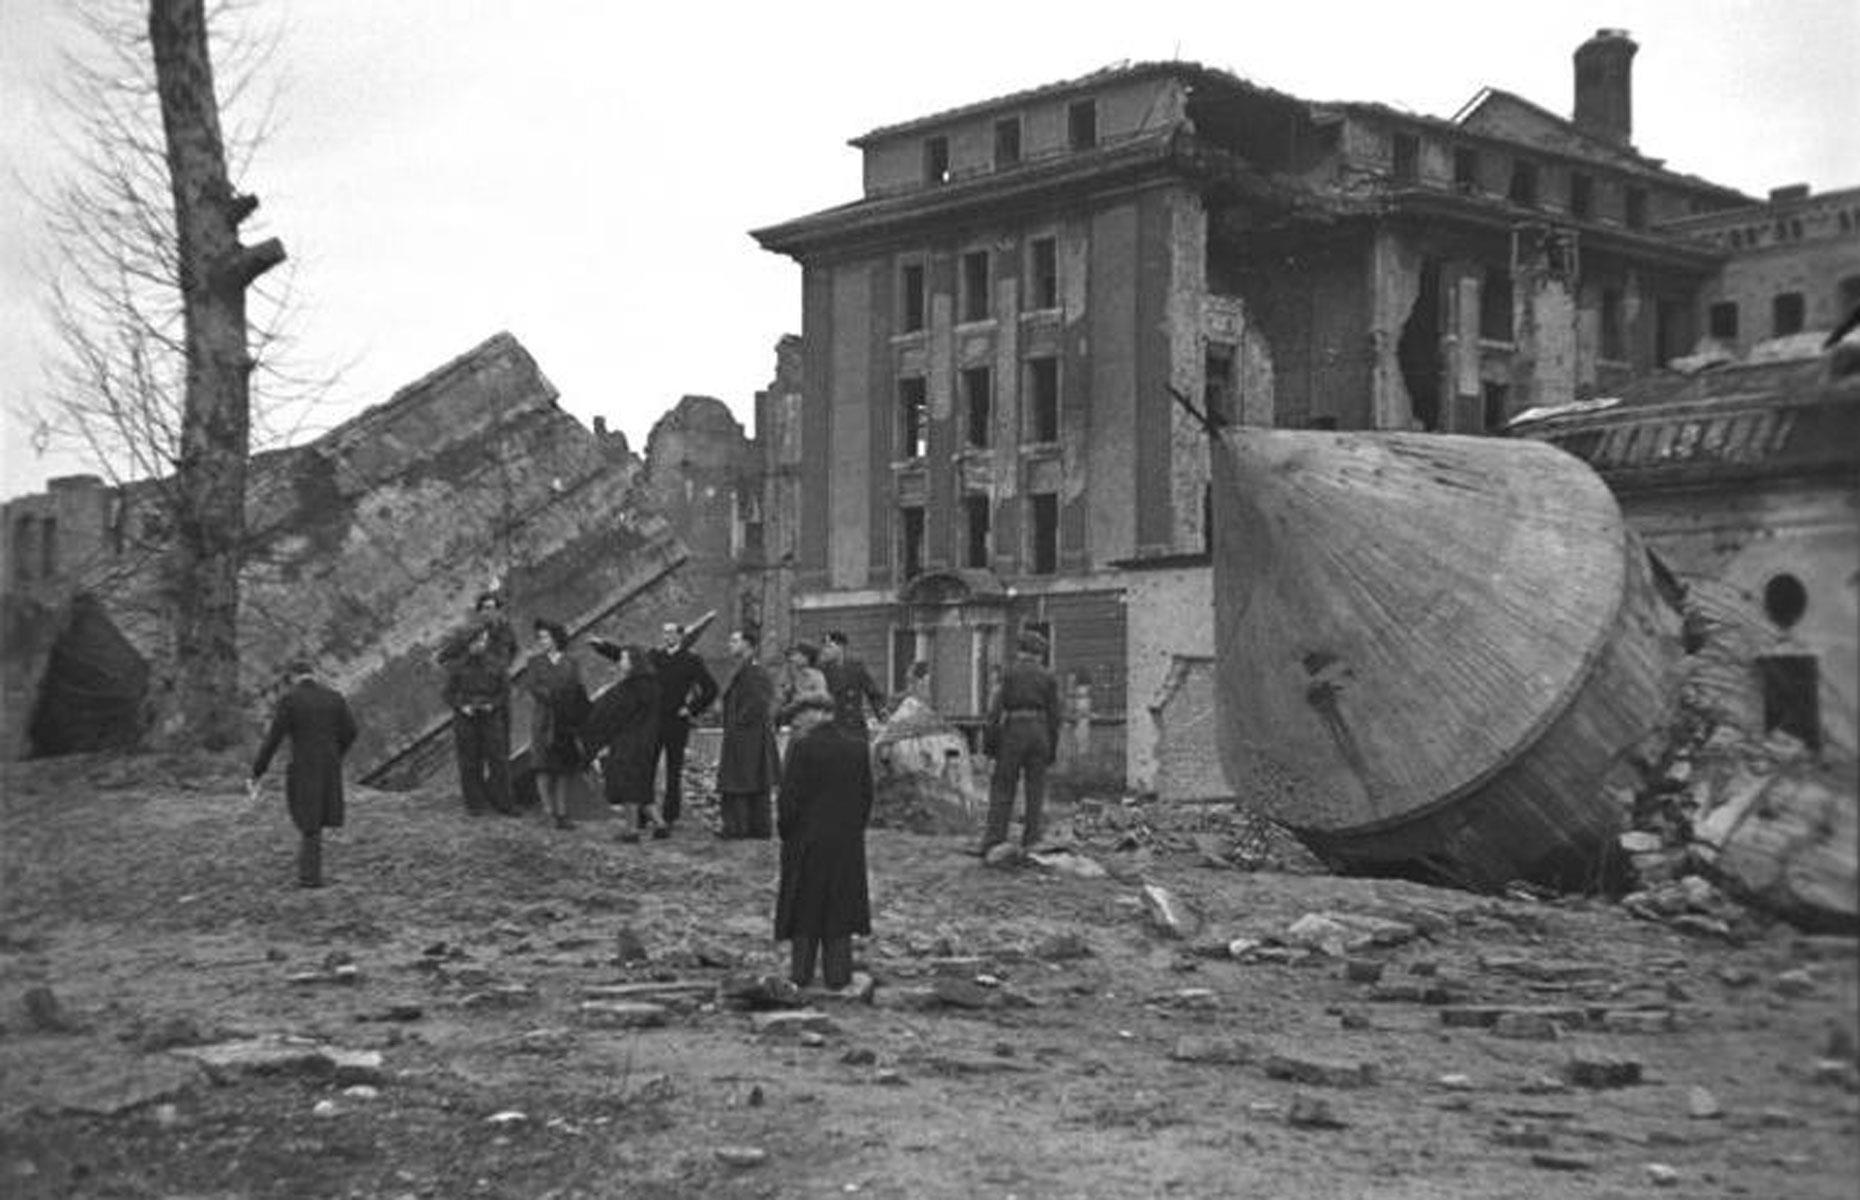 <p>Following the war, the Soviets razed the Reich Chancellery buildings, but the bunker remained more or less intact. A section of the facility was demolished during the 1990s, with the rest sealed up to avoid creating a shrine to Nazism. Today the remnants of Hitler's Führerbunker lurk beneath a nondescript residential car park.</p>